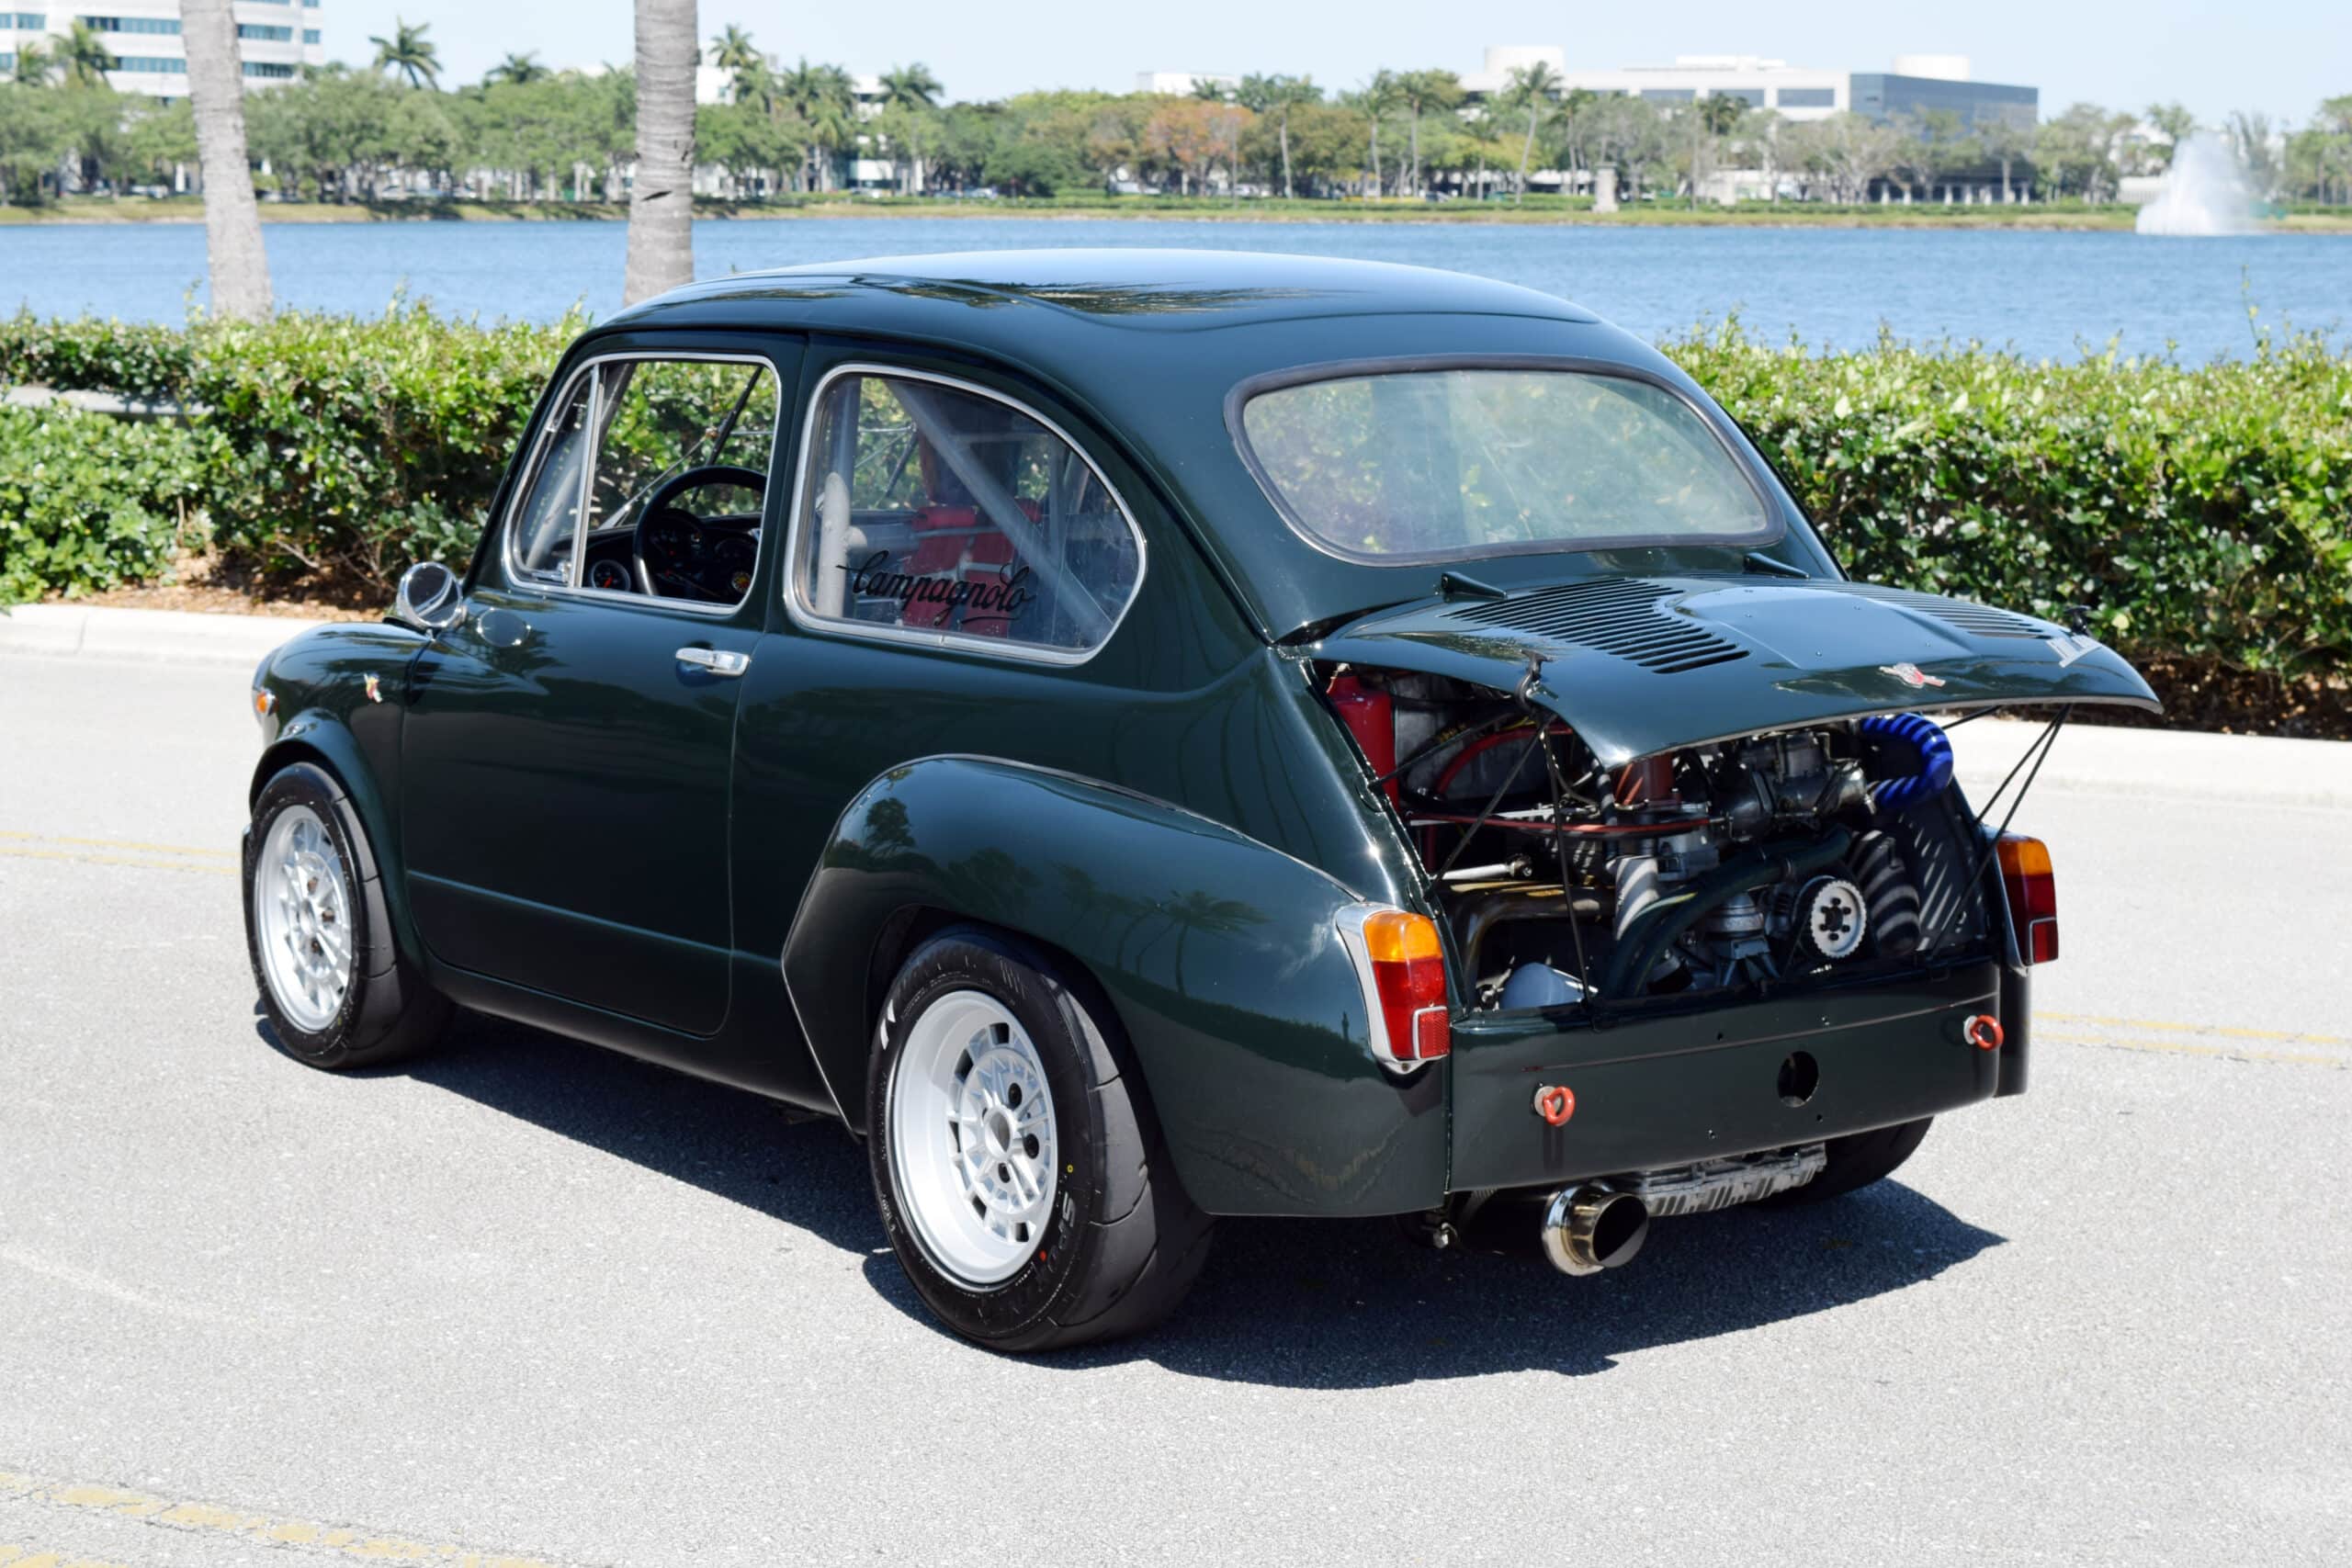 1967 Fiat 600 race car, REAL ABARTH components, 113 HP, street legal, 5-speed